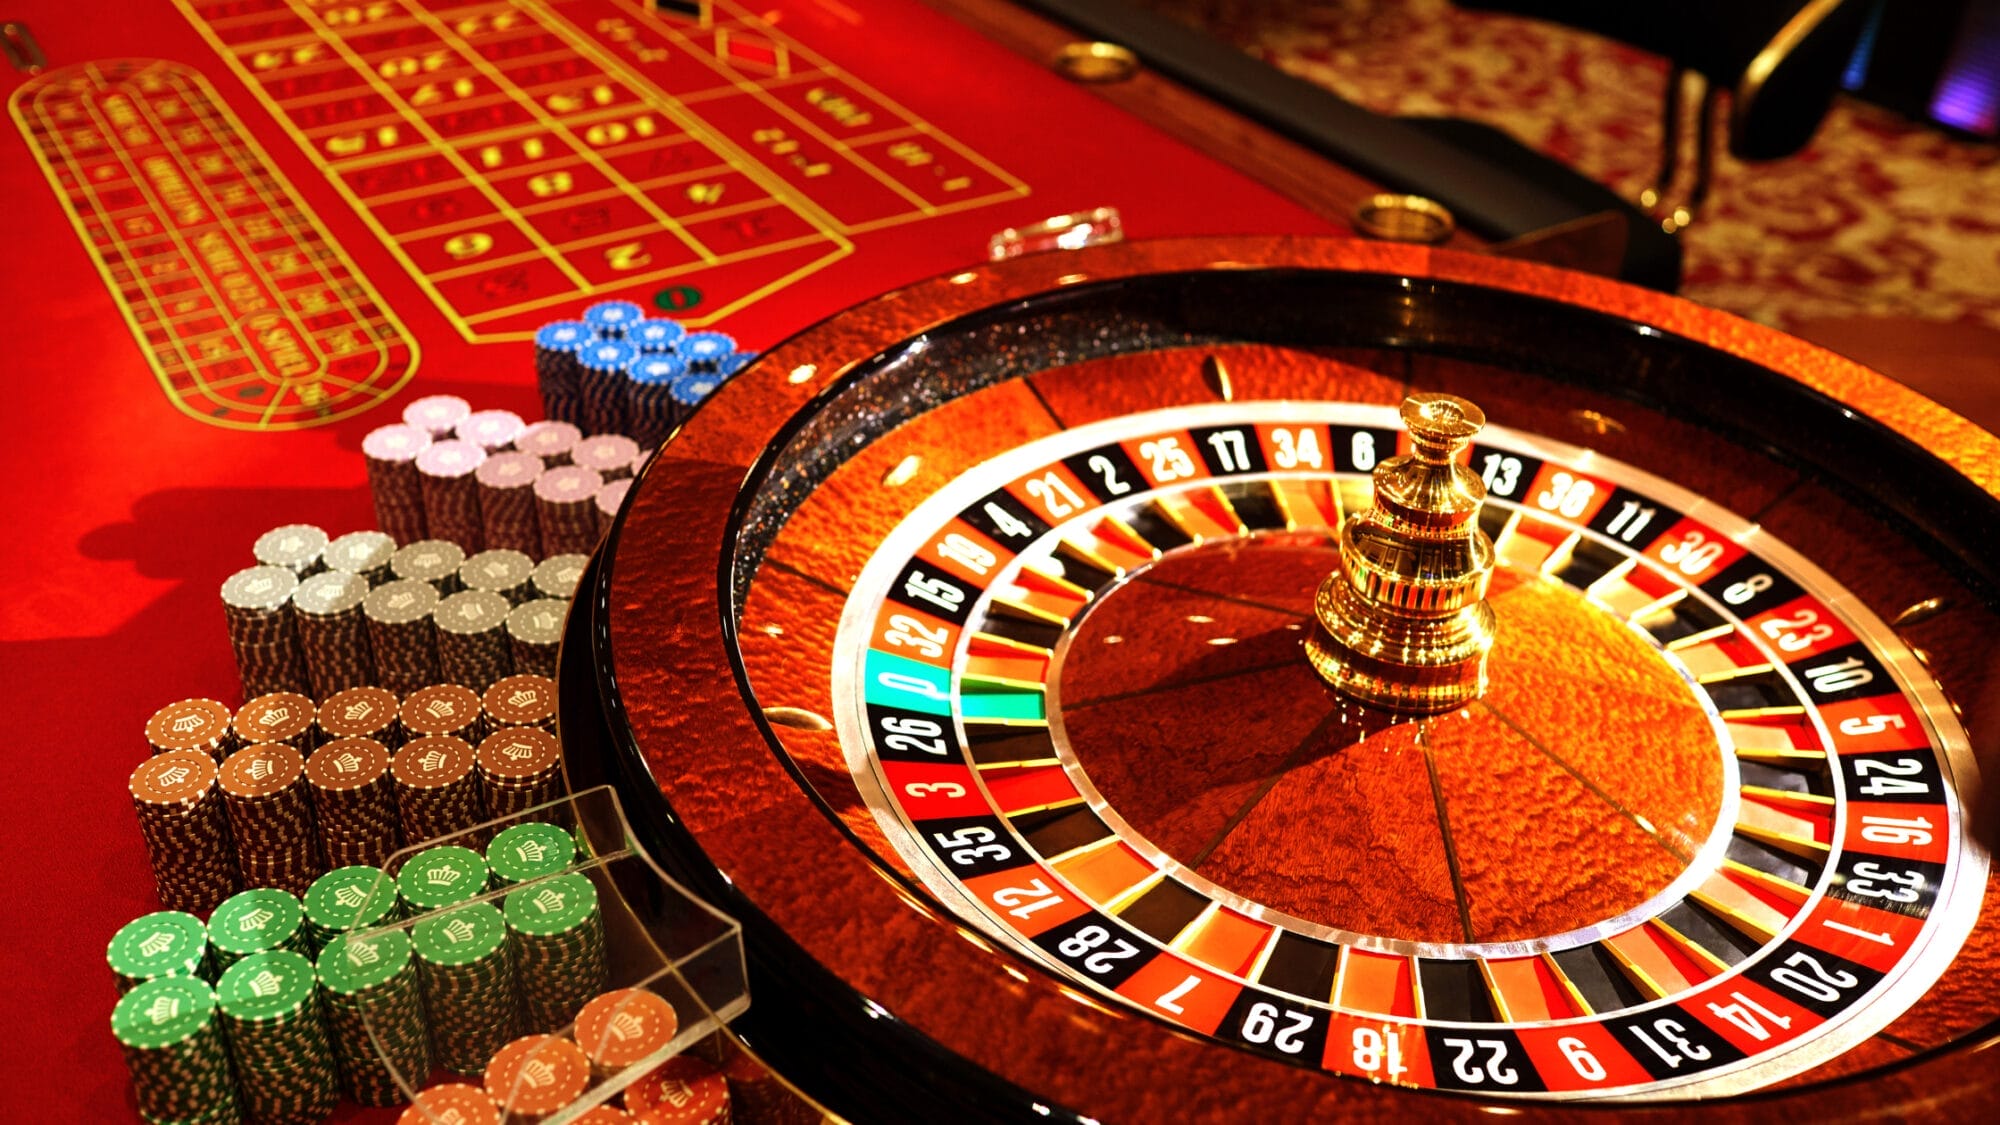 Roulette table image